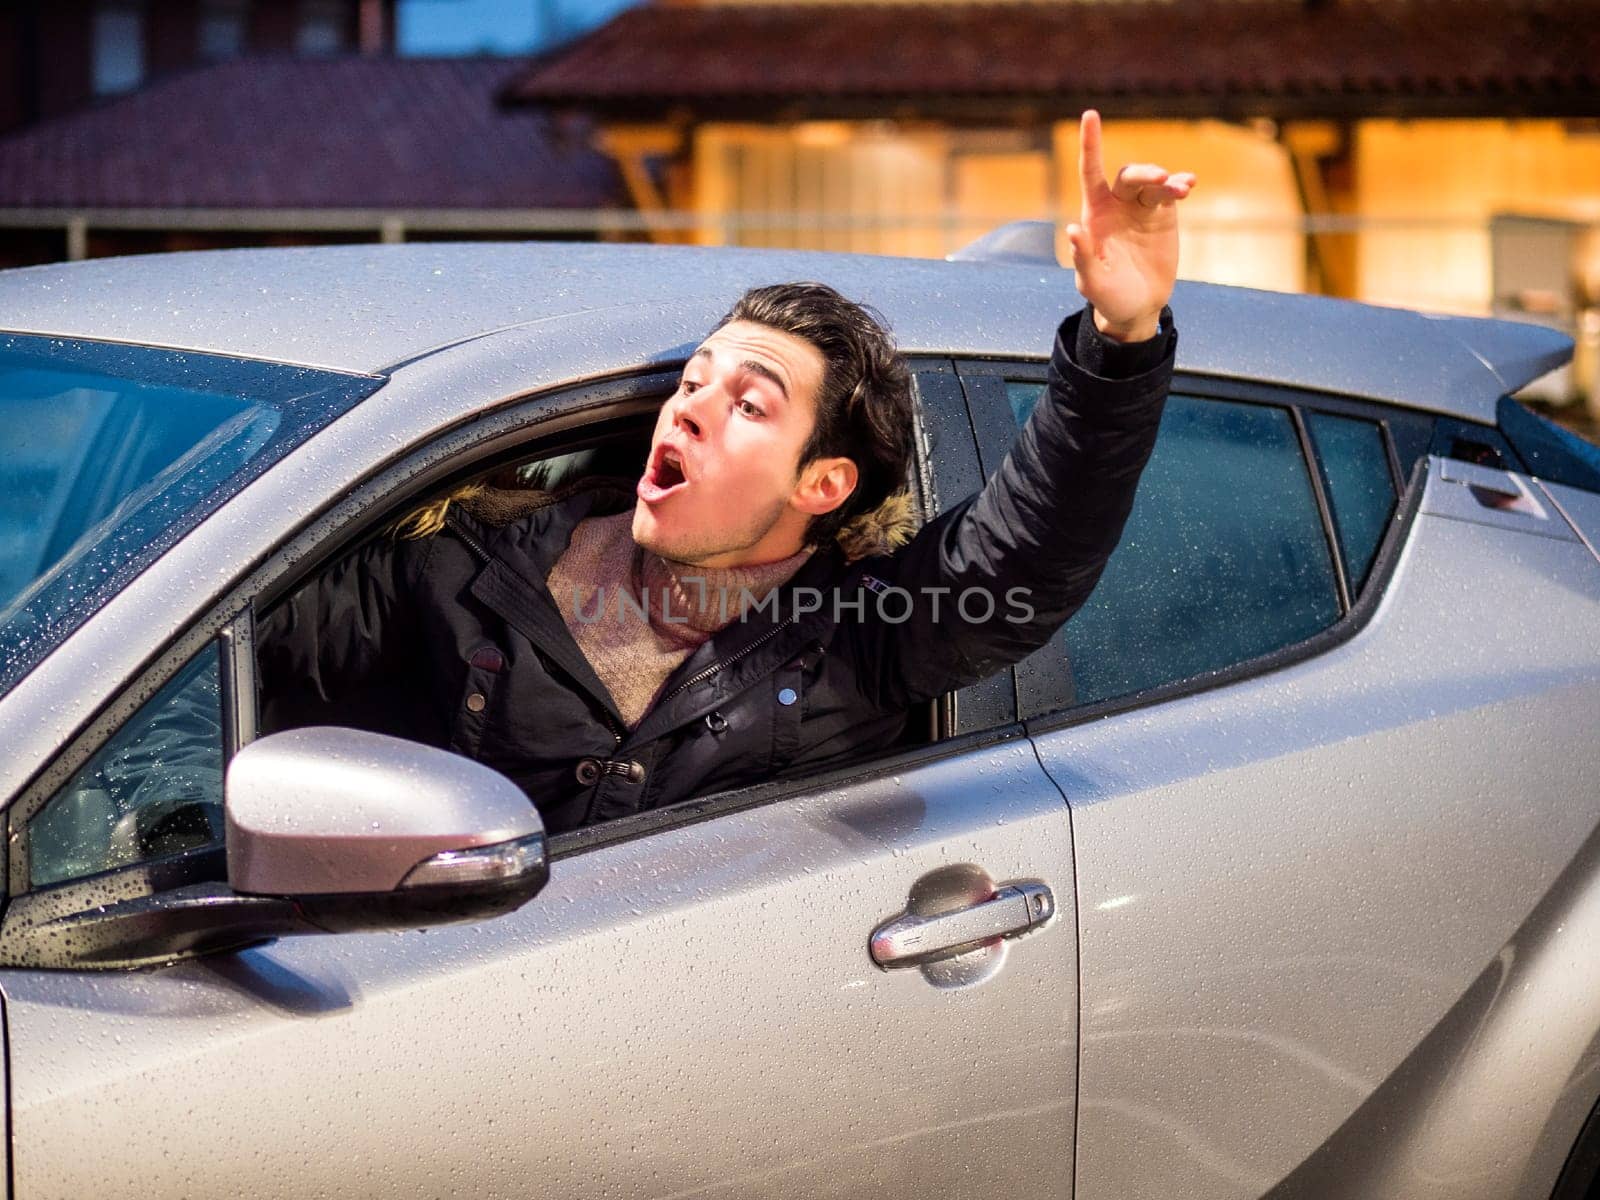 A man in a car with his hand up in the air calling someone or greeting a friend or stopping a person in the distance